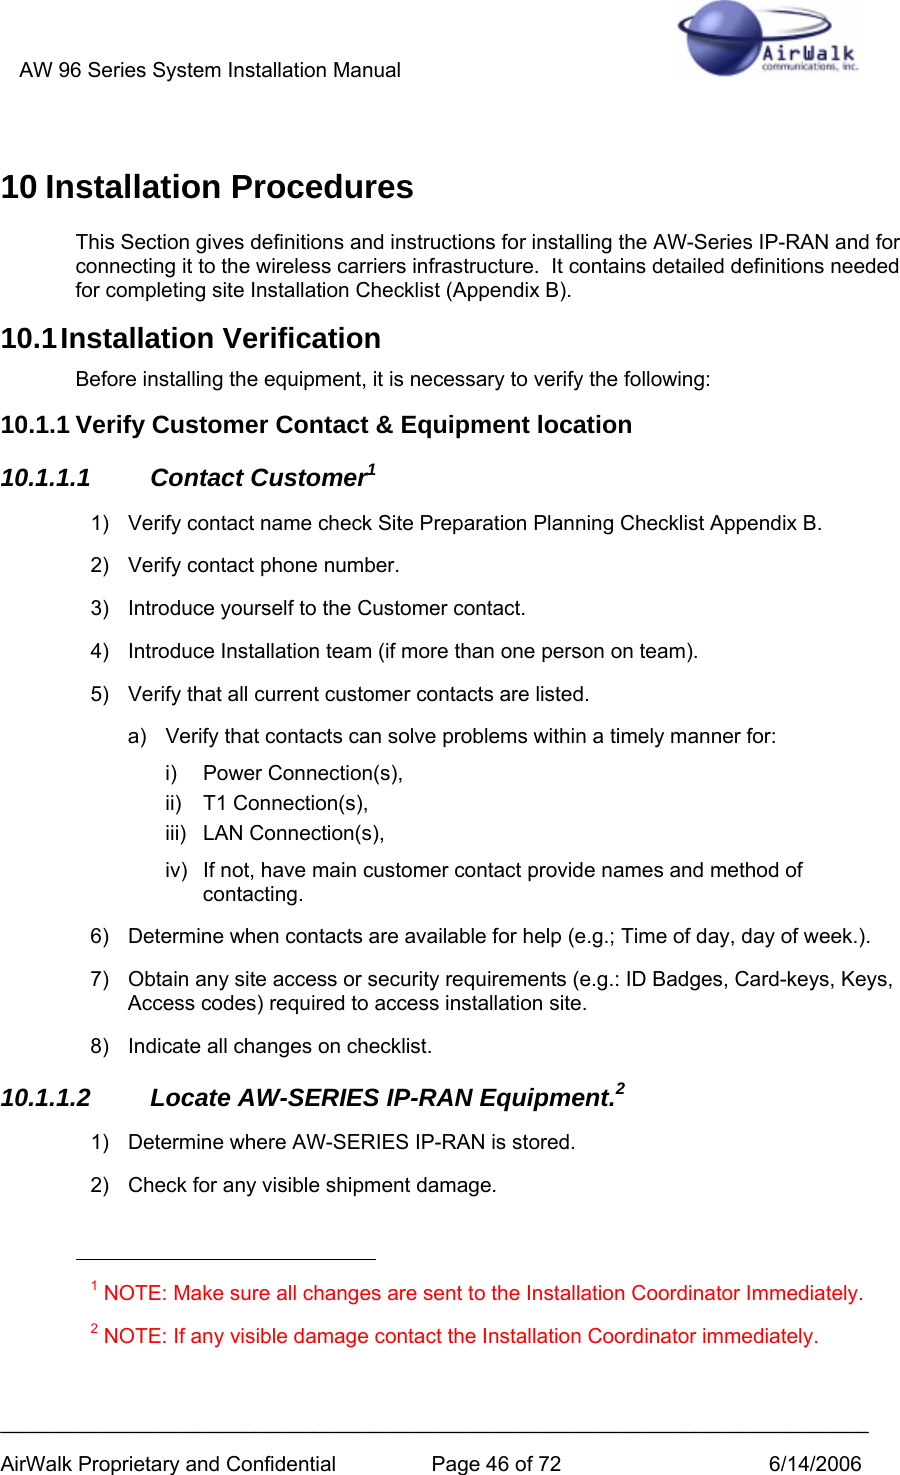 AW 96 Series System Installation Manual          ___________________________________________________________________________ AirWalk Proprietary and Confidential  Page 46 of 72  6/14/2006 10 Installation Procedures This Section gives definitions and instructions for installing the AW-Series IP-RAN and for connecting it to the wireless carriers infrastructure.  It contains detailed definitions needed for completing site Installation Checklist (Appendix B). 10.1 Installation  Verification Before installing the equipment, it is necessary to verify the following: 10.1.1 Verify Customer Contact &amp; Equipment location 10.1.1.1 Contact Customer1 1)  Verify contact name check Site Preparation Planning Checklist Appendix B. 2)  Verify contact phone number. 3)  Introduce yourself to the Customer contact. 4)  Introduce Installation team (if more than one person on team). 5)  Verify that all current customer contacts are listed. a)  Verify that contacts can solve problems within a timely manner for: i) Power Connection(s), ii) T1 Connection(s), iii) LAN Connection(s), iv)  If not, have main customer contact provide names and method of contacting. 6)  Determine when contacts are available for help (e.g.; Time of day, day of week.). 7)  Obtain any site access or security requirements (e.g.: ID Badges, Card-keys, Keys, Access codes) required to access installation site. 8)  Indicate all changes on checklist. 10.1.1.2  Locate AW-SERIES IP-RAN Equipment.2 1) Determine where AW-SERIES IP-RAN is stored.  2)  Check for any visible shipment damage.                                                        1 NOTE: Make sure all changes are sent to the Installation Coordinator Immediately. 2 NOTE: If any visible damage contact the Installation Coordinator immediately.  